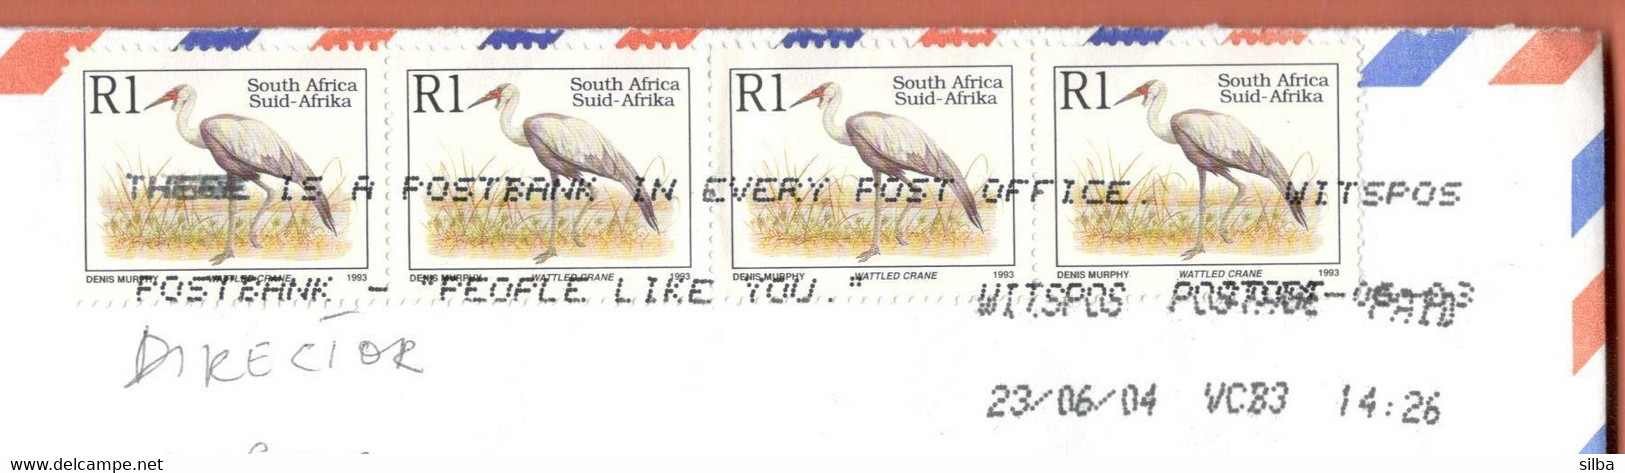 South Africa Witspos 2004 / There Is A Postbank In Every Post Office / Machine Stamp Slogan / Bird Wattled Crane 1993 - Cartas & Documentos